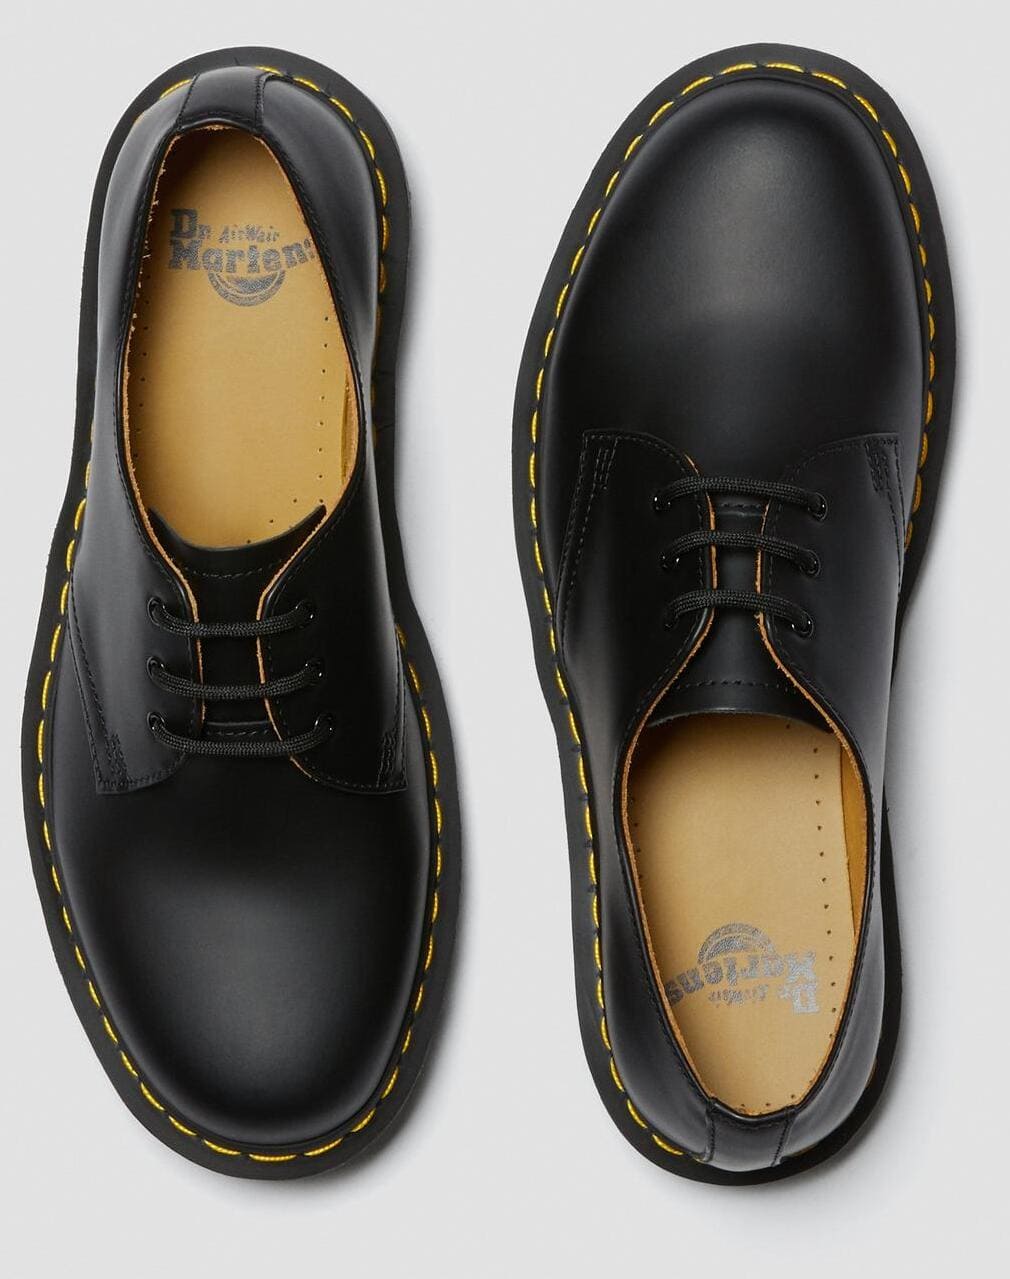 Dr. Martens 1461 Smooth Leather Oxford Shoes Black